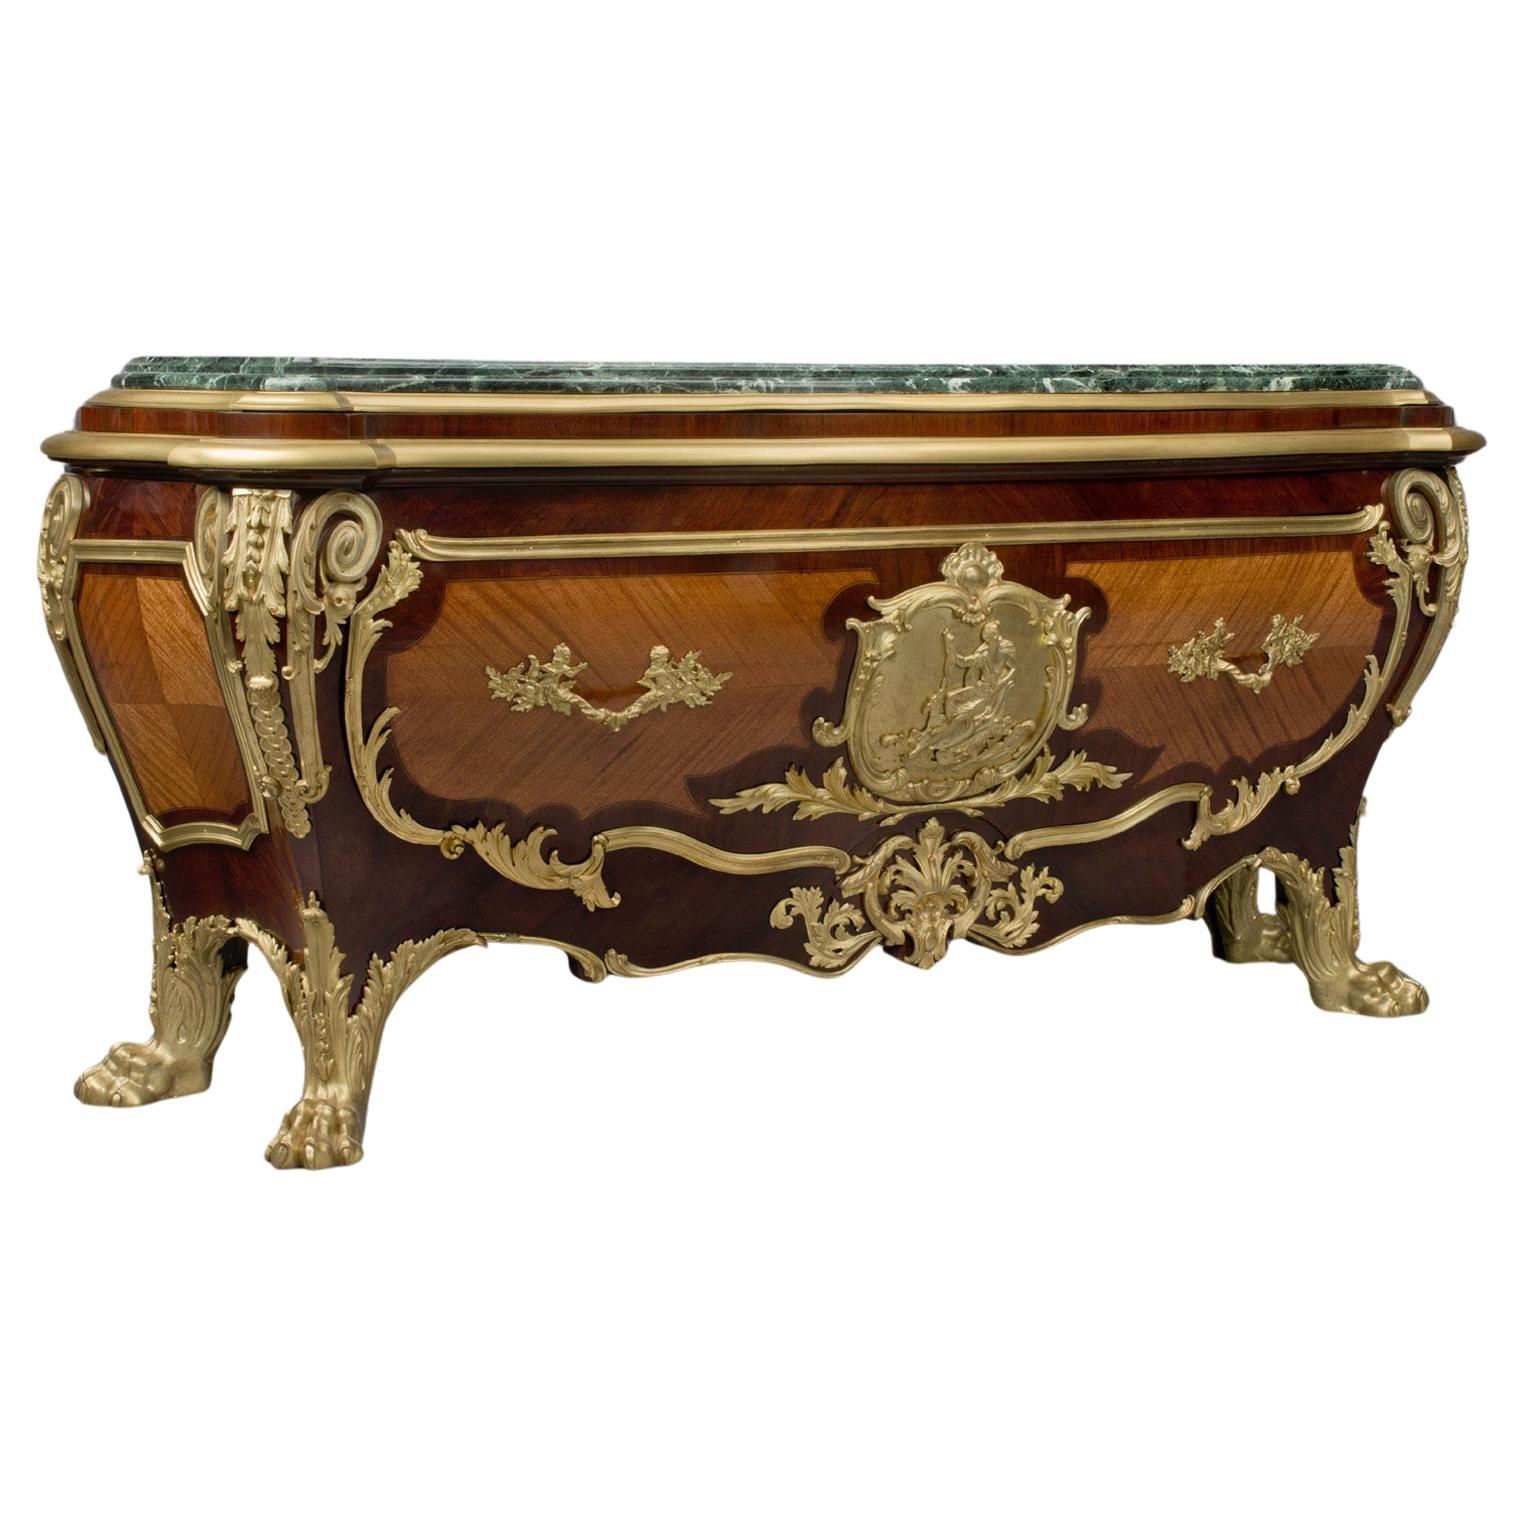 A Mahogany Grande Commode en Tombeau, after the Model by Cressent